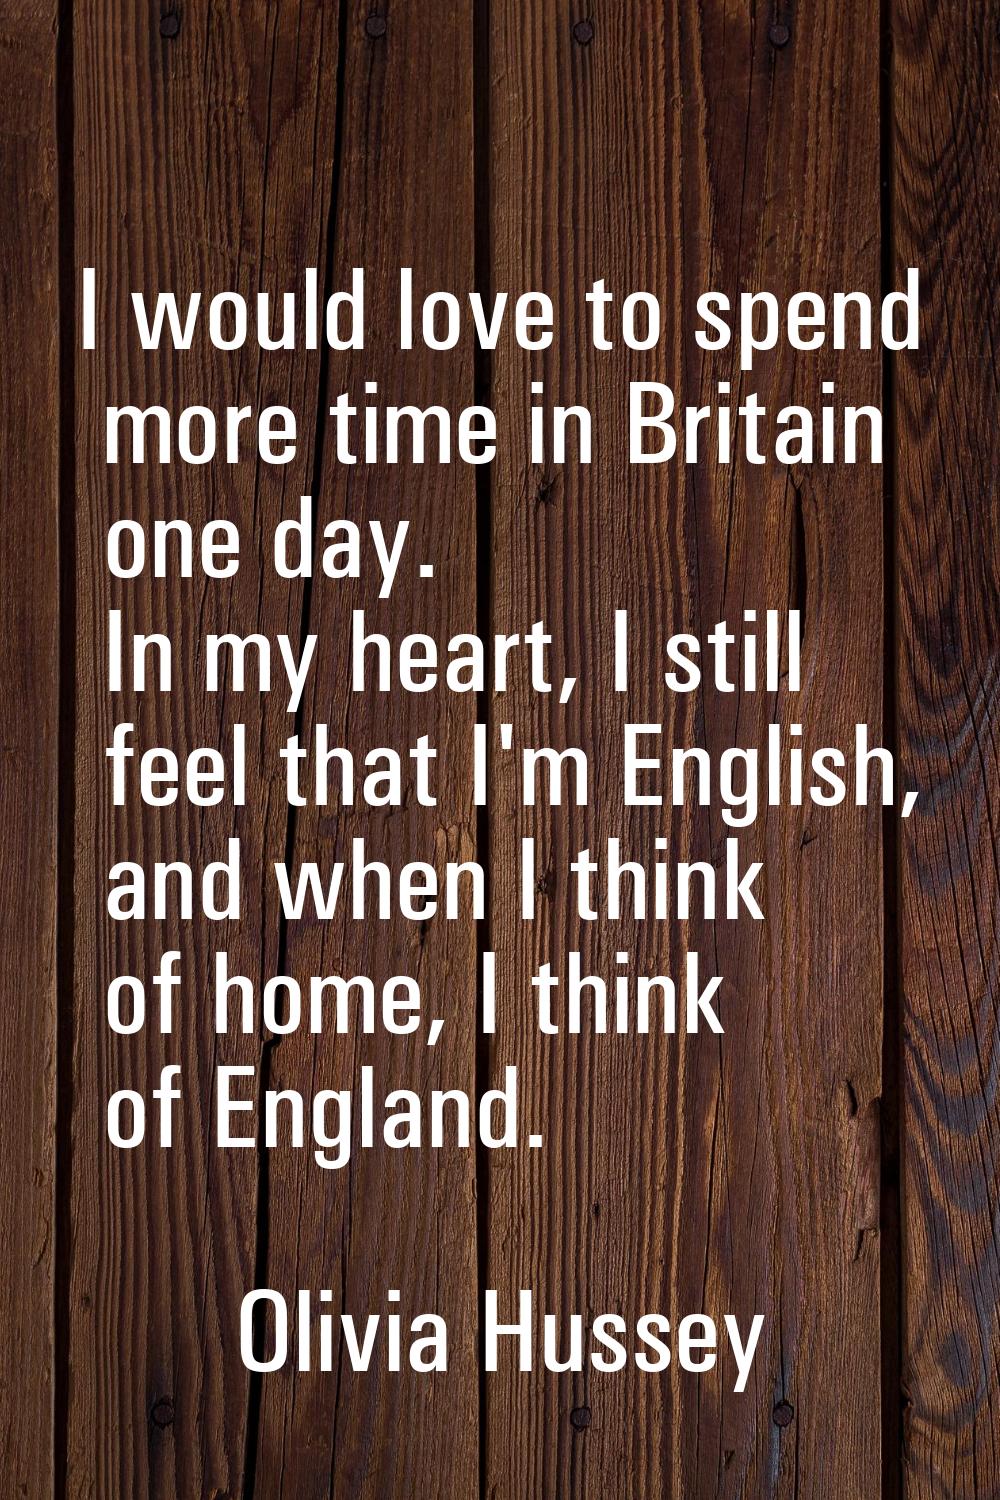 I would love to spend more time in Britain one day. In my heart, I still feel that I'm English, and